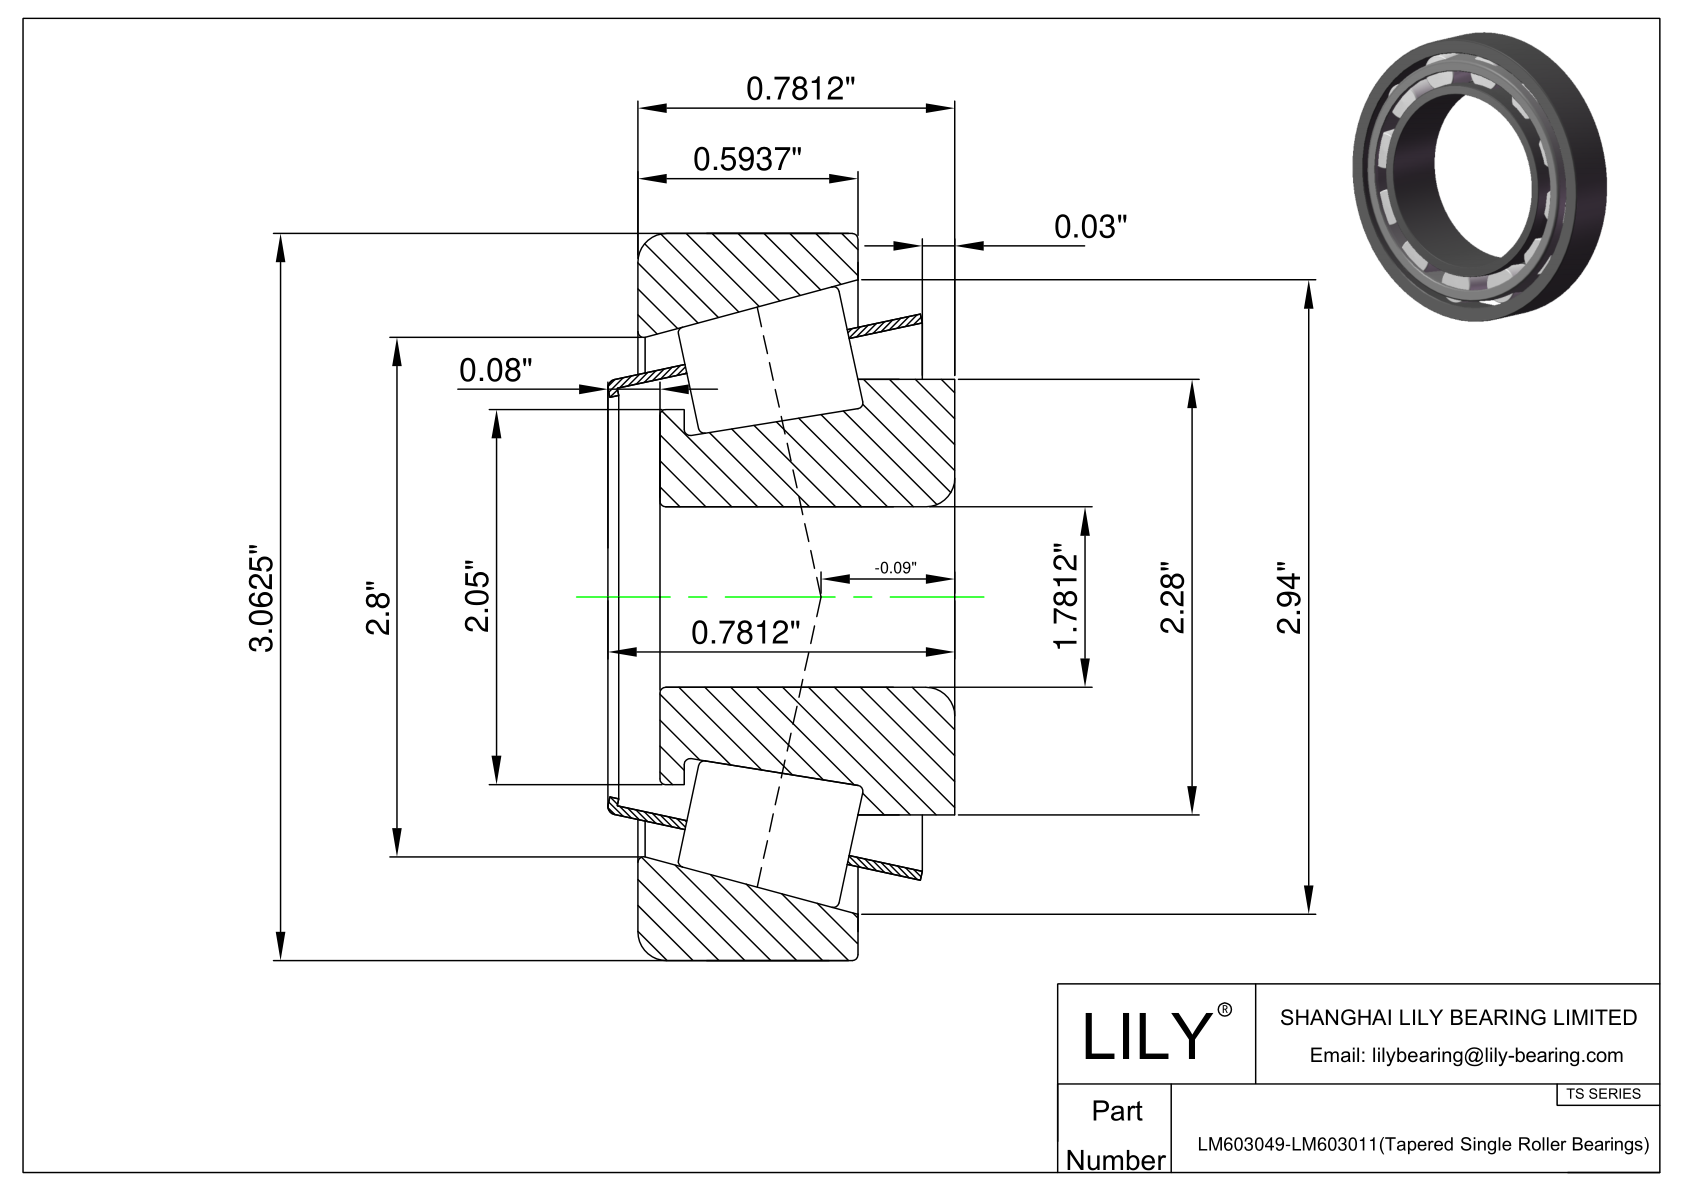 LM603049-LM603011 TS (Tapered Single Roller Bearings) (Imperial) cad drawing